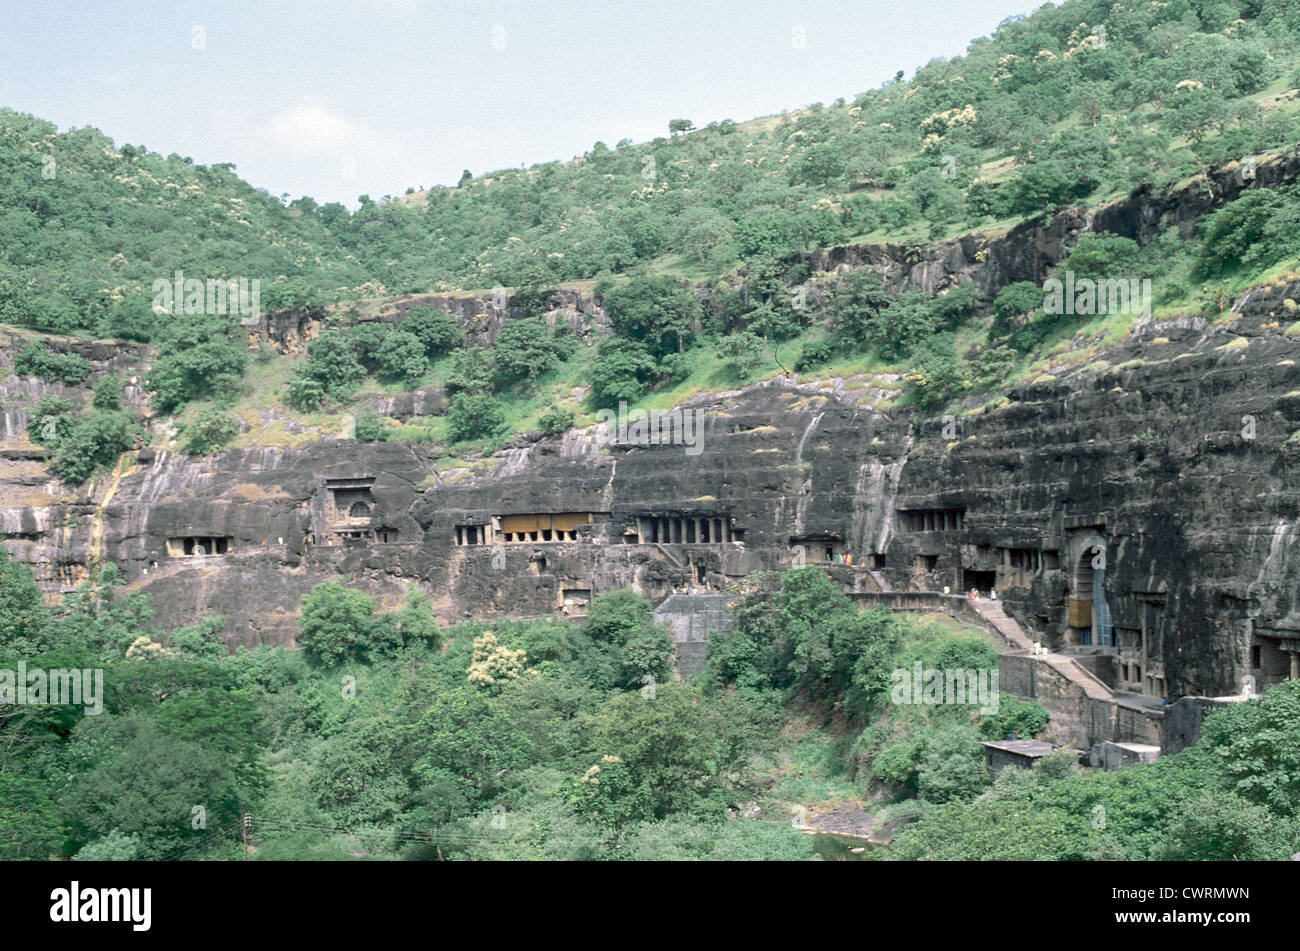 India. Maharashtra. Ajanta Caves. Rock-cut cave monuments which date from the 2nd century BCE to the 600 CE. Exterior view. Stock Photo